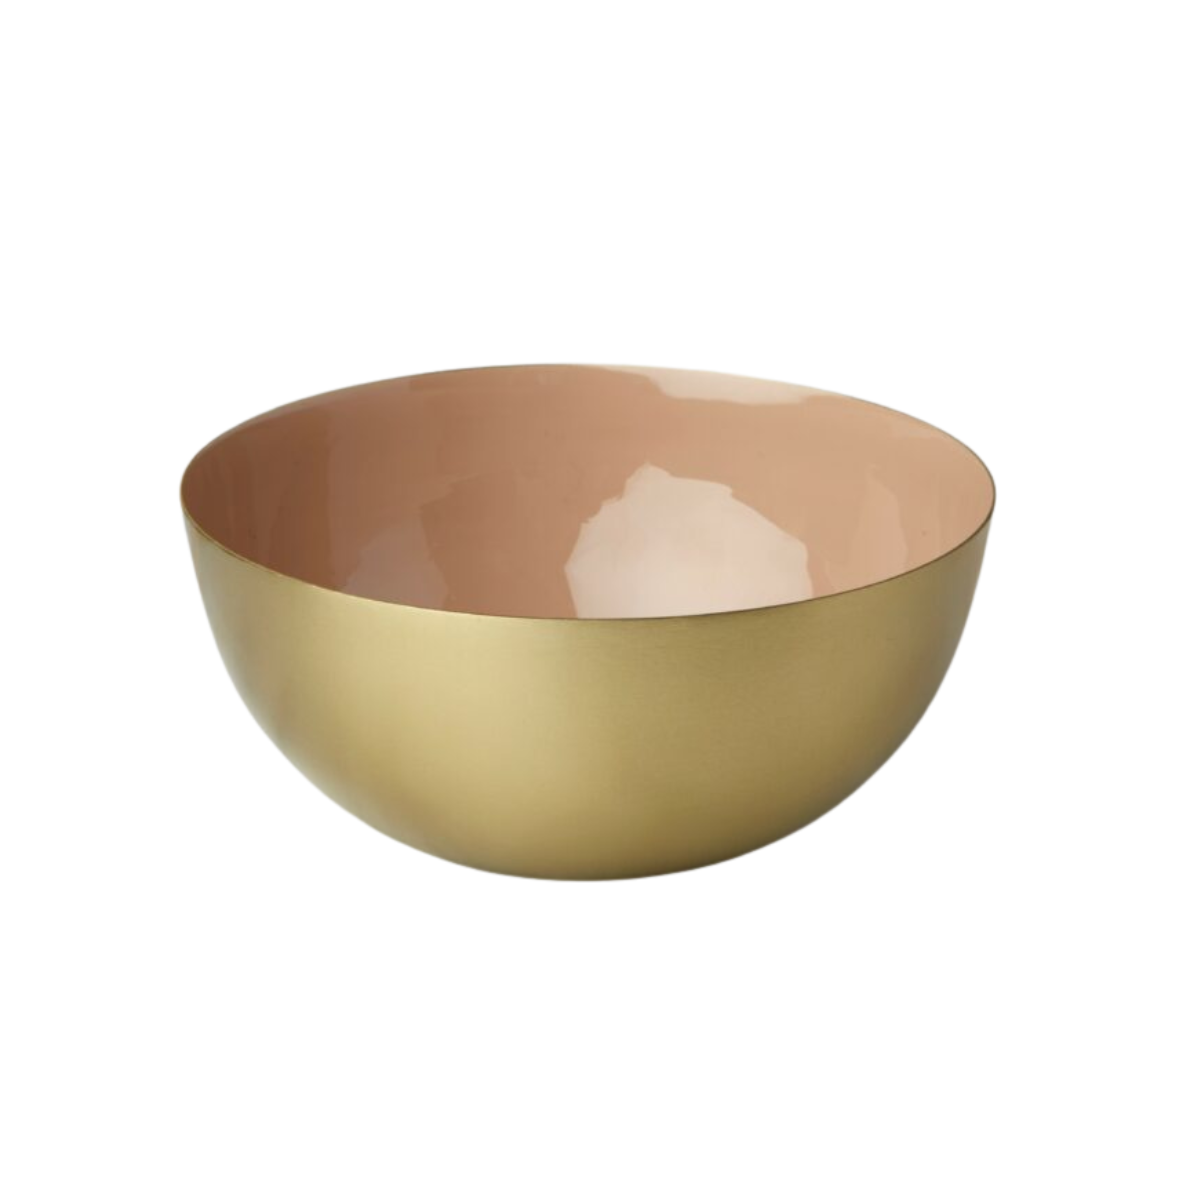 Astra Small Bowl, Persimmon